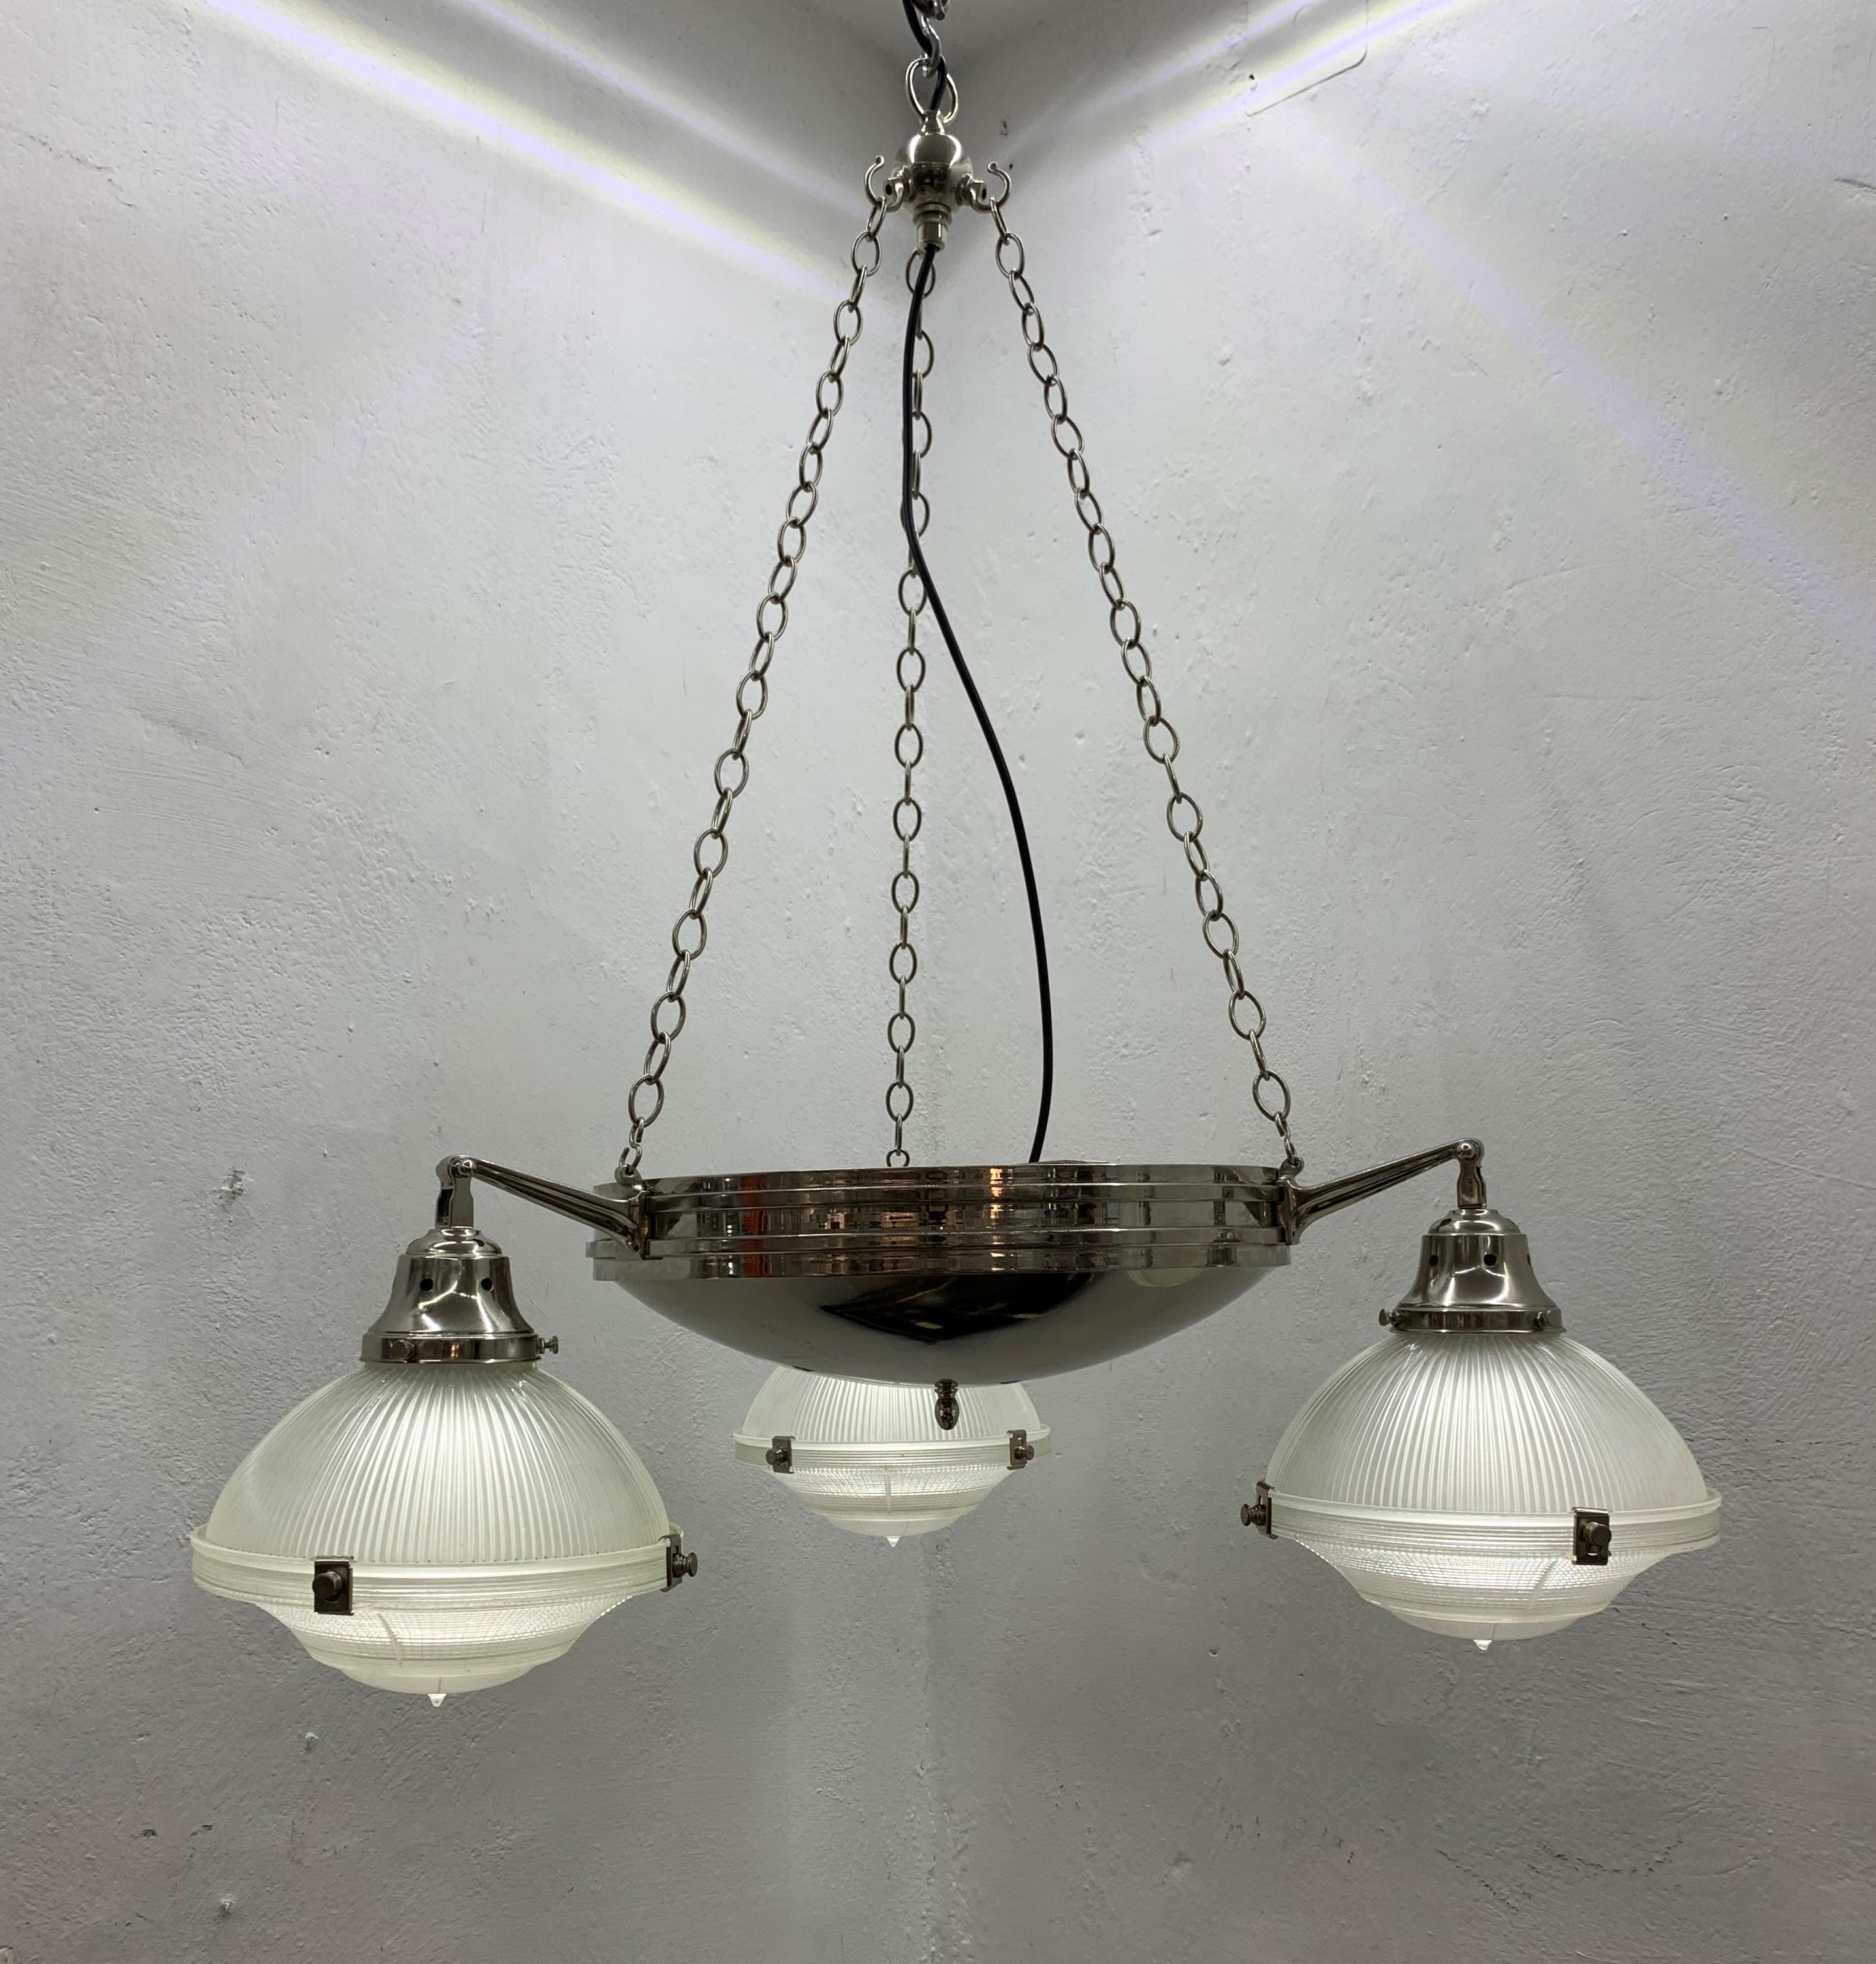 Beautiful 3-light chandelier manufactured in nickel plated brass and pressed glass.
Each pressed glass shade consists of 3 separate pieces.
Stamped with patent number and 